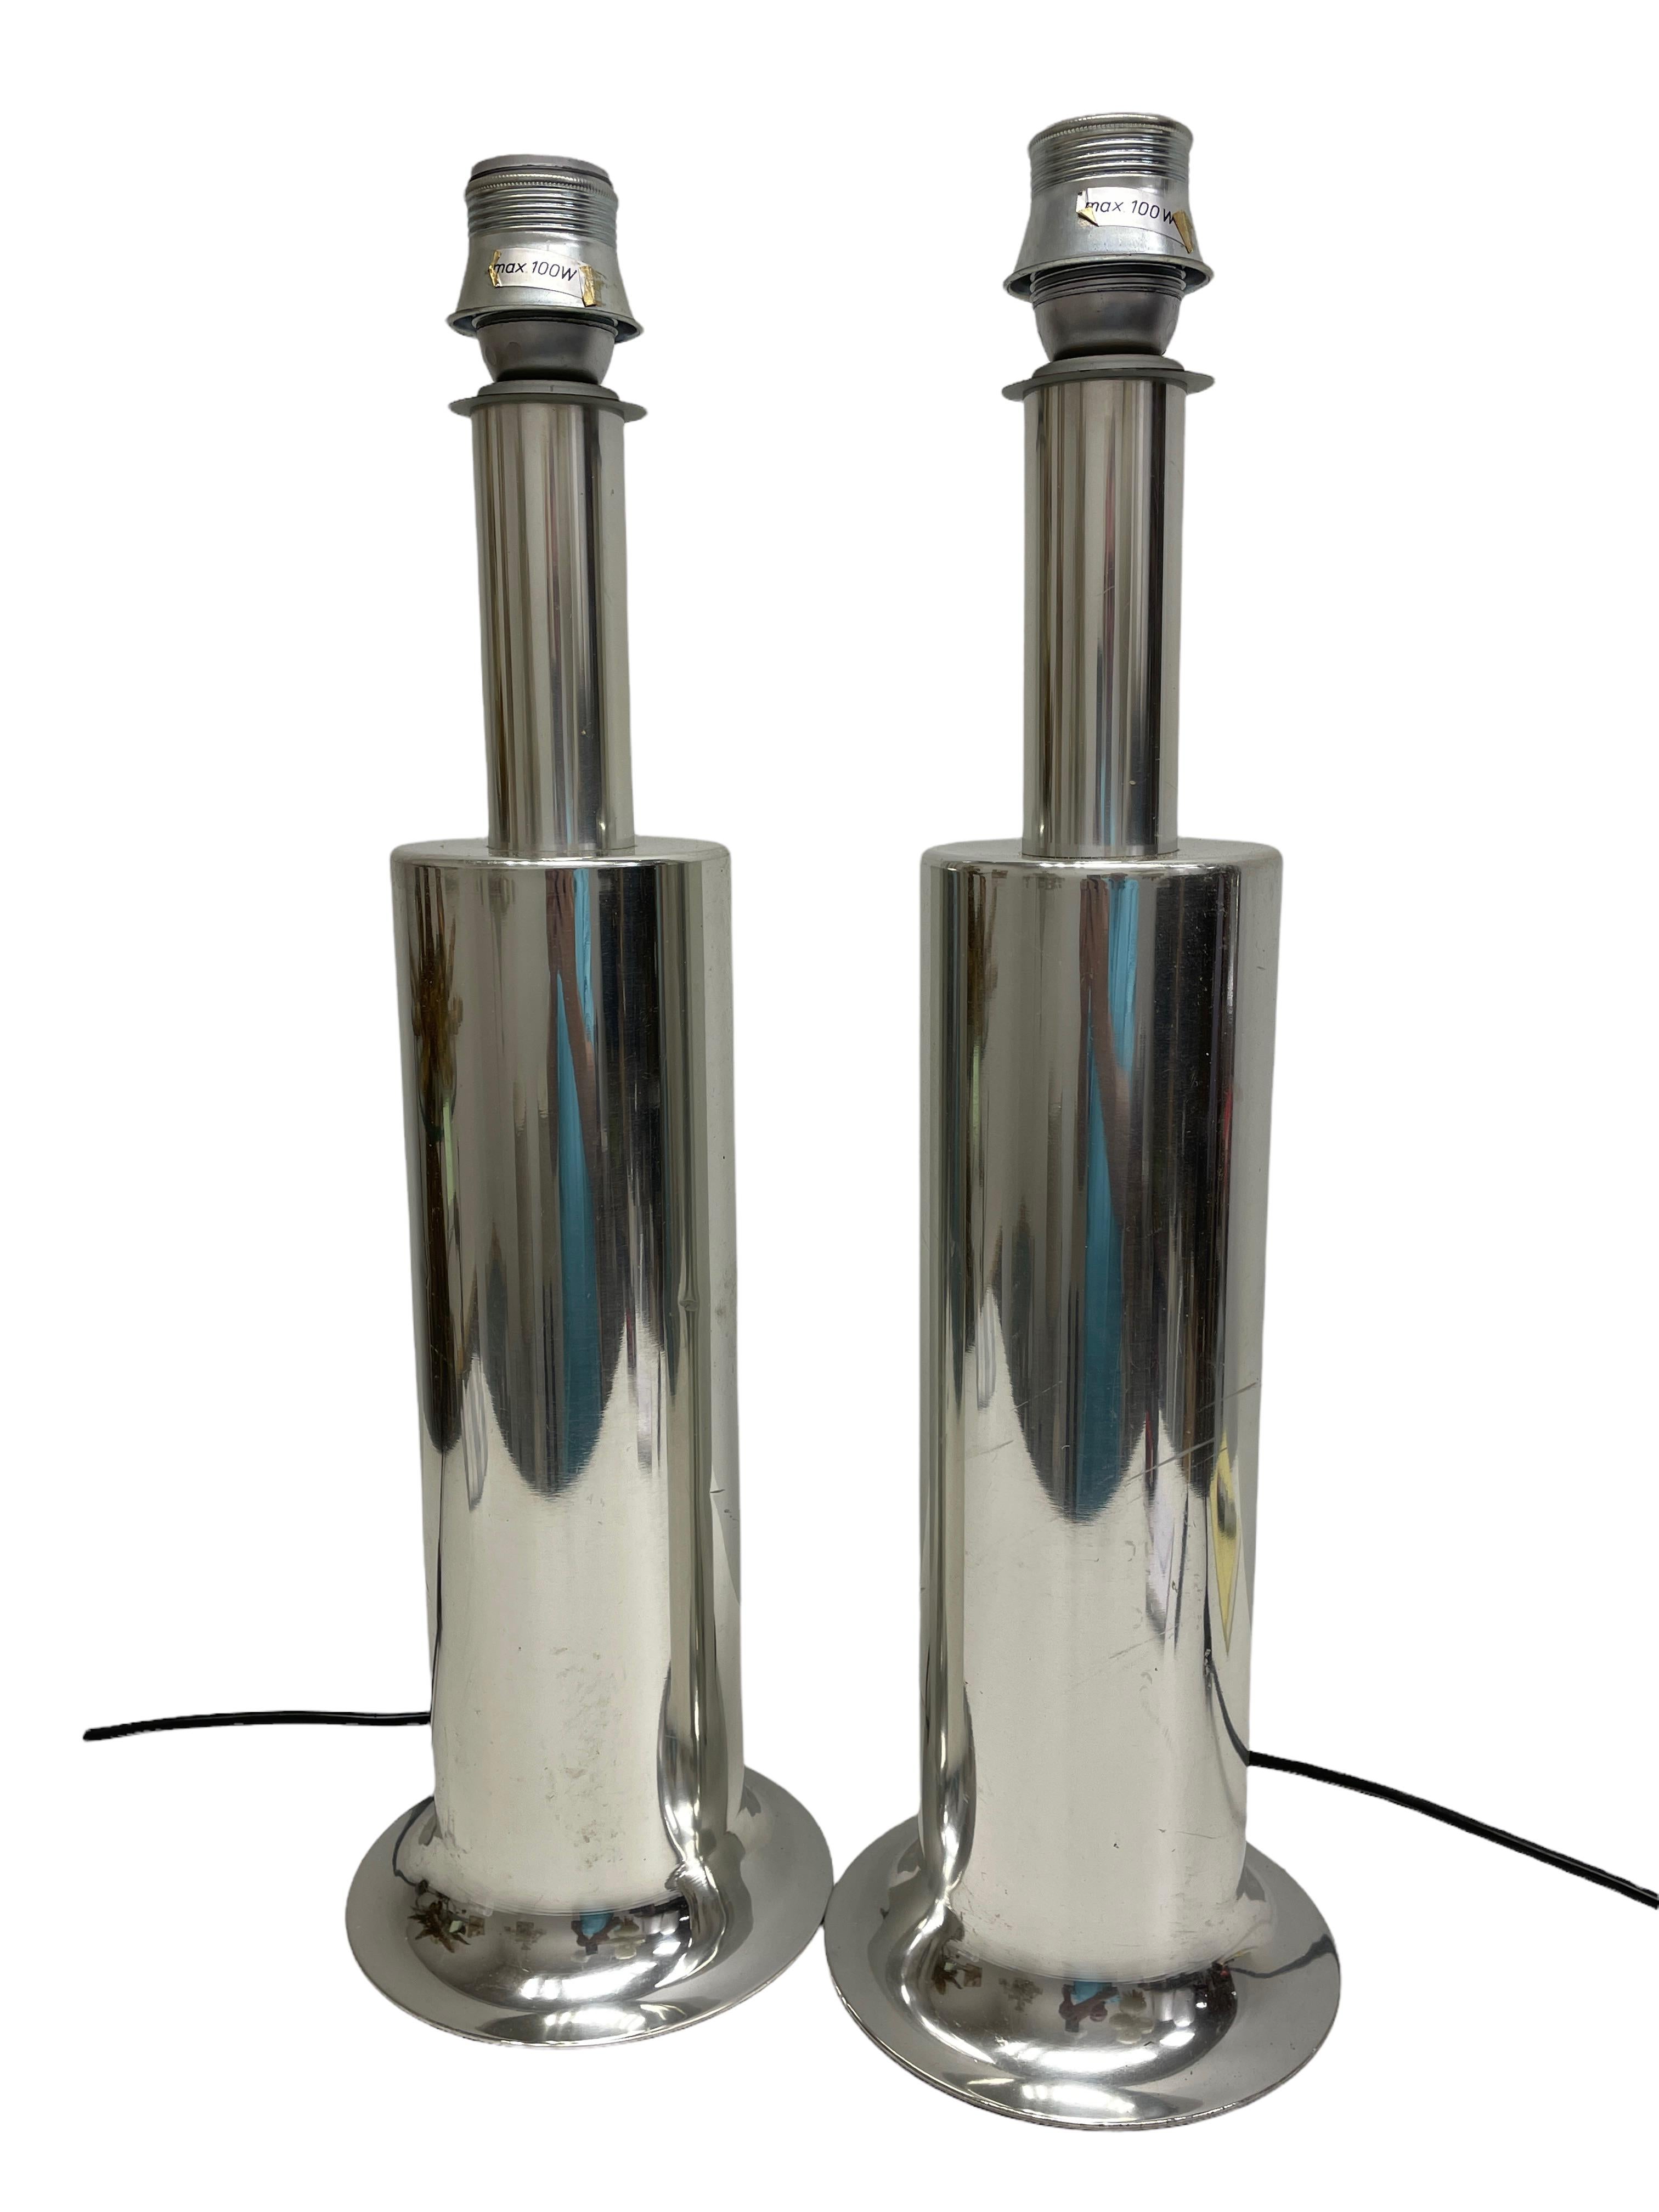 A pair of beautiful large monumental table lamp foots or side table lamps. Made of aluminum by Doria Leuchten, Germany. Each one of them requires one European E27 / 110 Volt Edison bulb, up to 100 watts. It comes without a shade, so you can get your